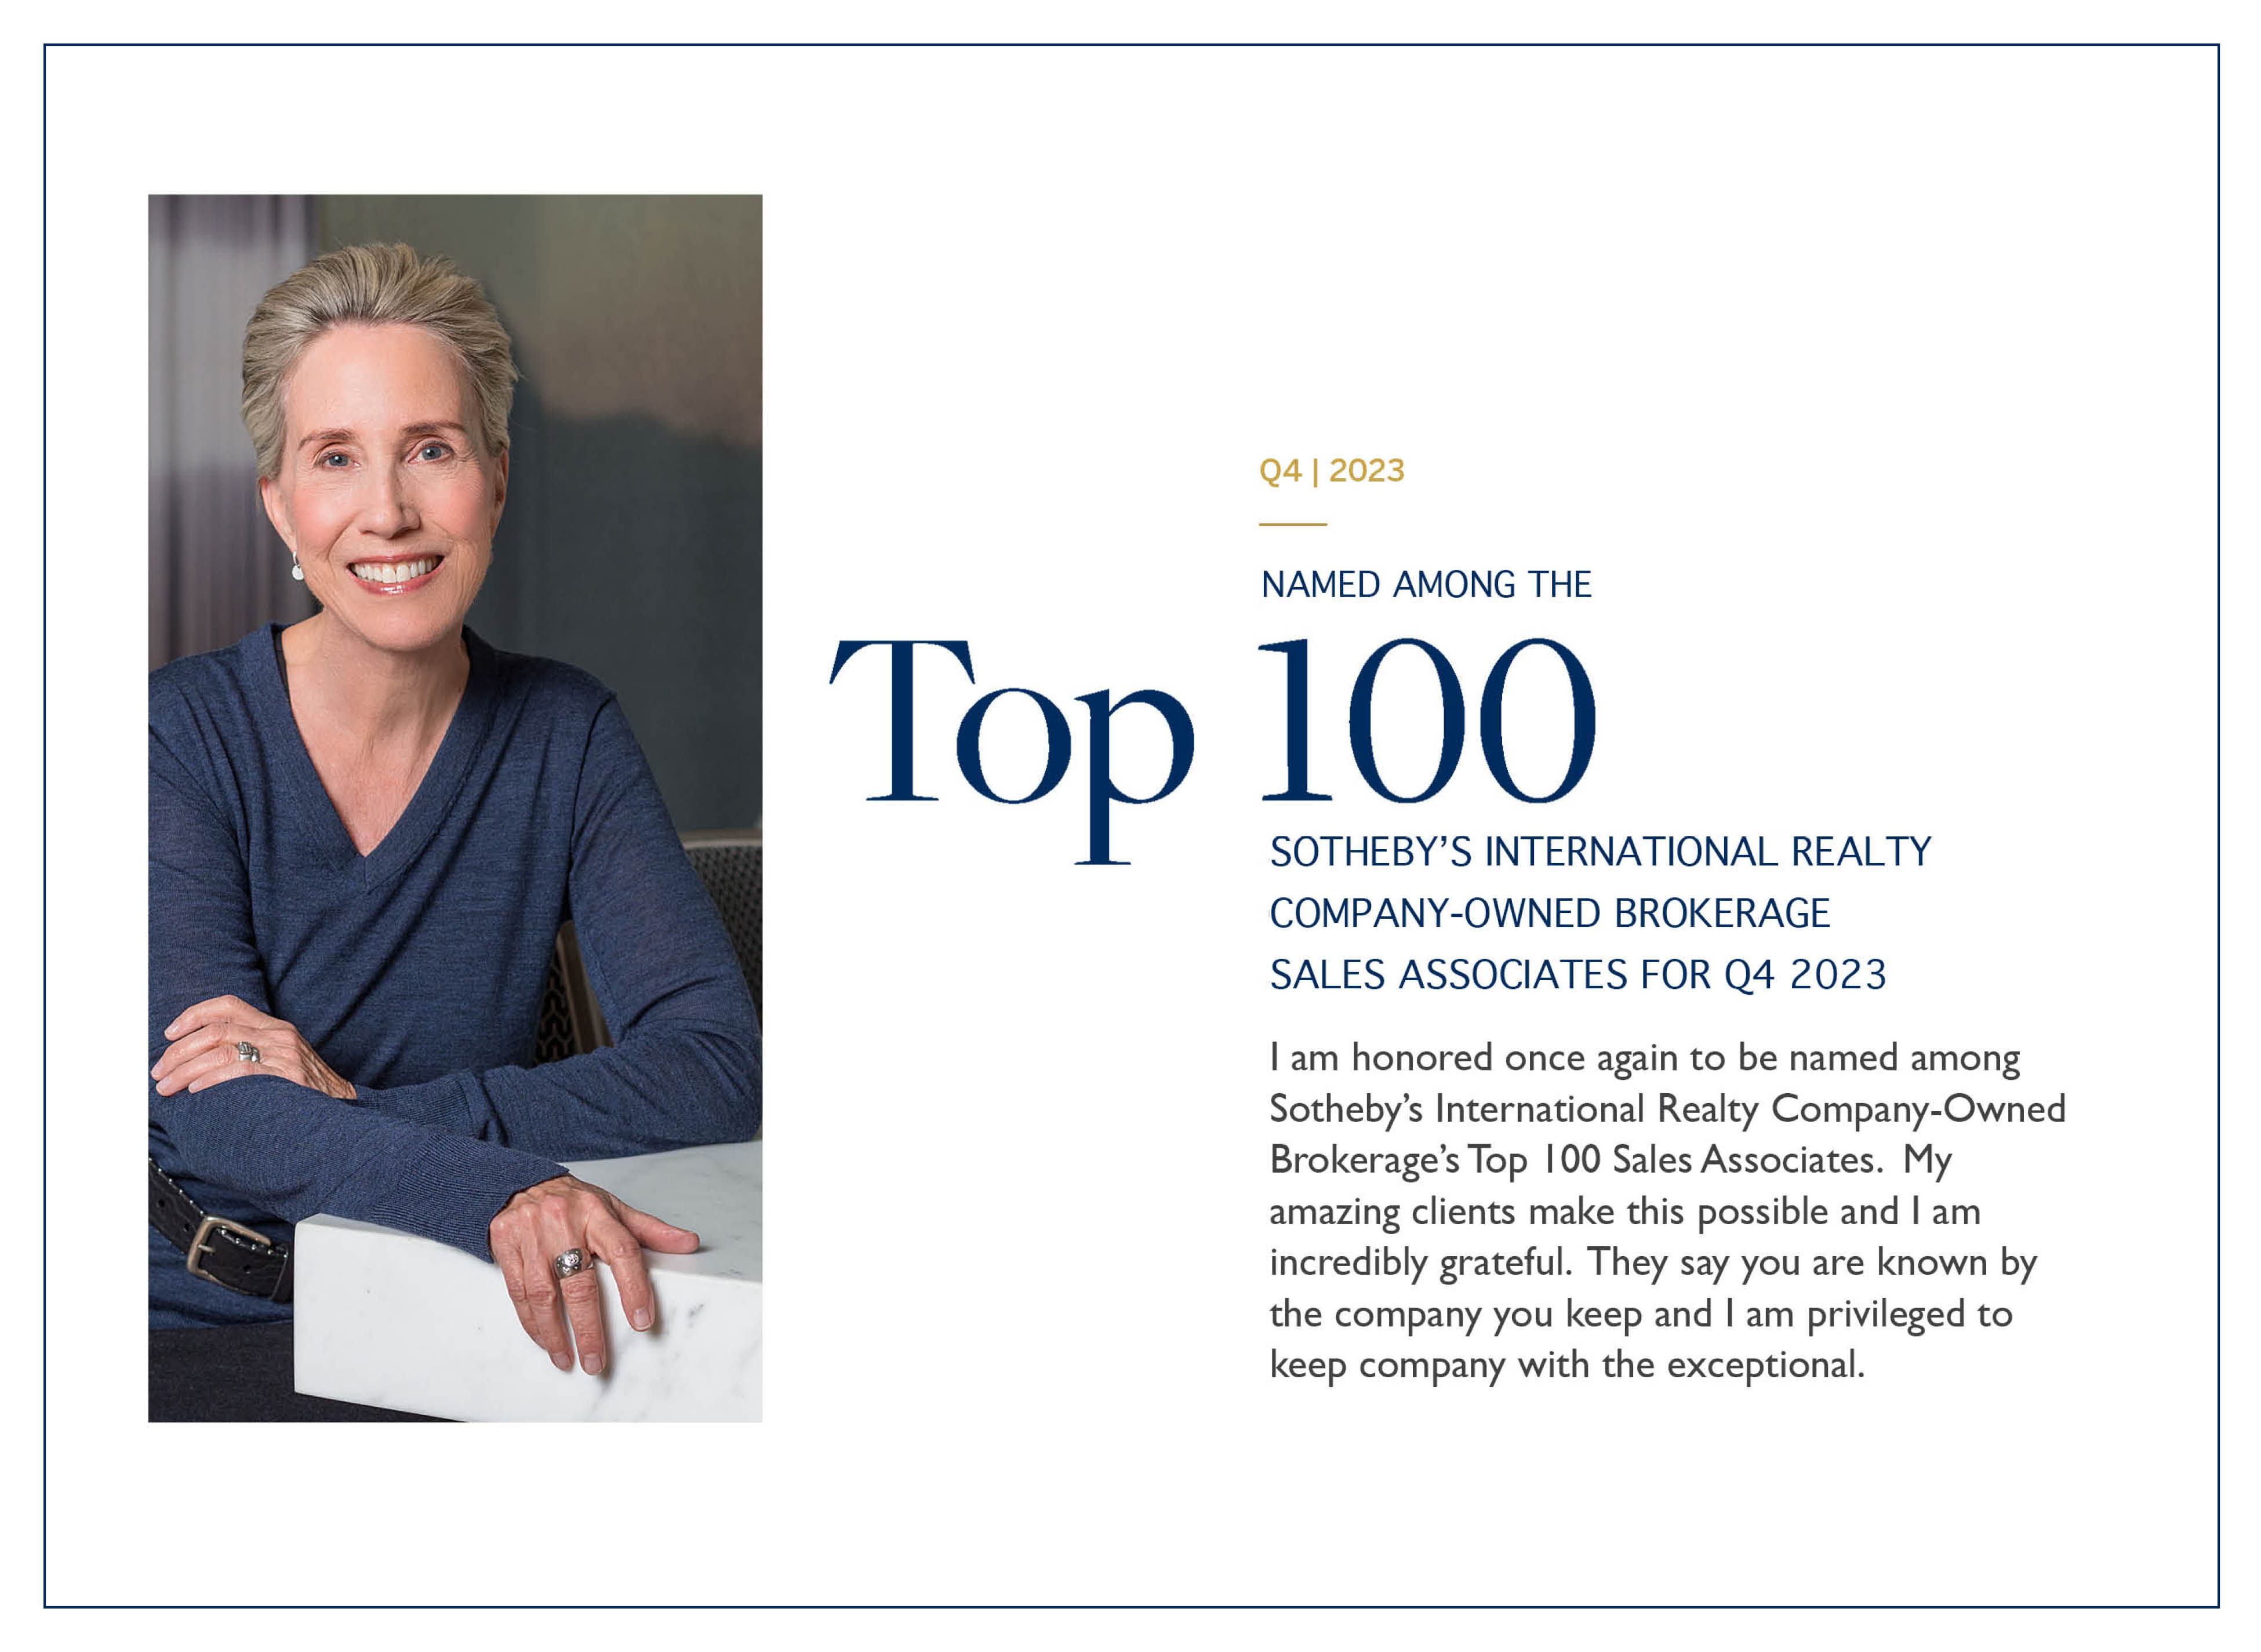 Rebecca Named to Sotheby's "Top 100" for Q4 | 2023